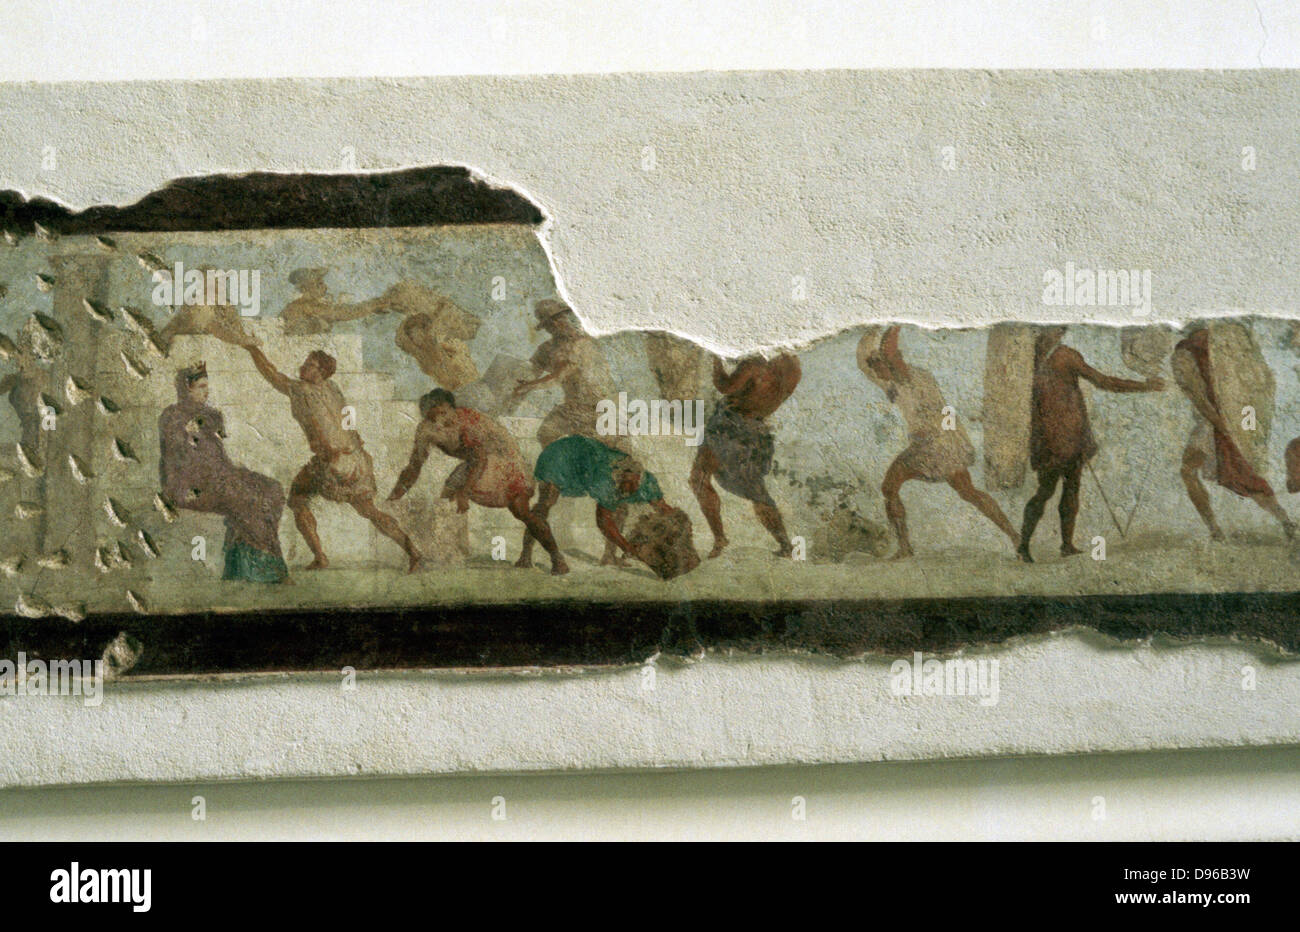 Roman workers building a wall; slaves watched by a taskmaster. Fragment of a wall painting Stock Photo